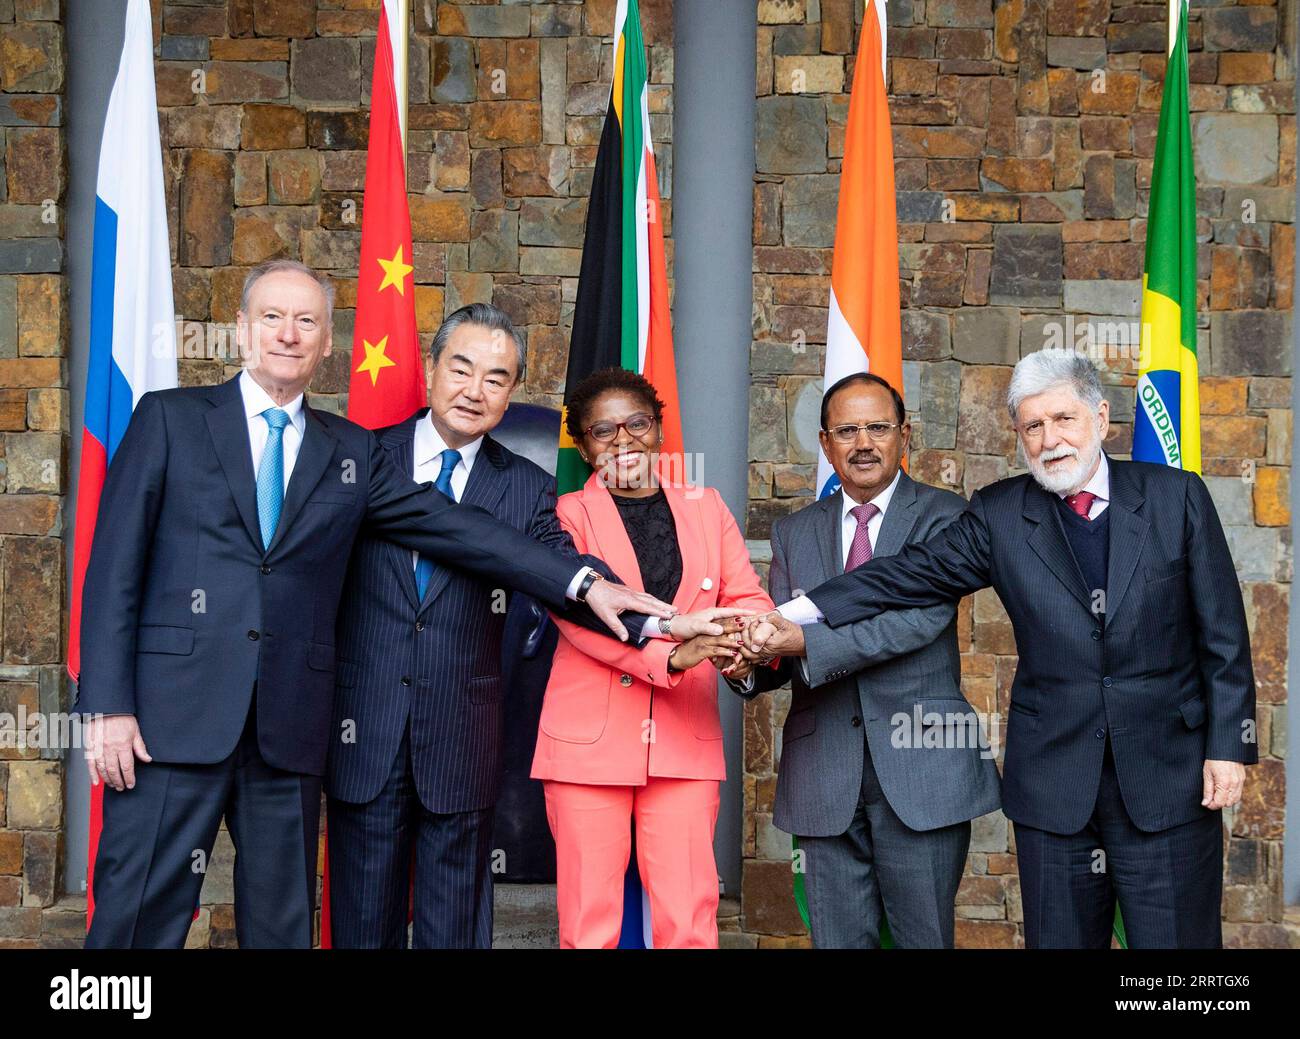 230725 -- JOHANNESBURG, July 25, 2023 -- Wang Yi 2nd L, a member of the Political Bureau of the Communist Party of China CPC Central Committee and director of the Office of the CPC Central Commission for Foreign Affairs, poses for a group photo with Khumbudzo Ntshavheni C, minister in the Presidency of South Africa, Celso Luiz Nunes Amorim 1st R, chief adviser of the Presidency of Brazil, Nikolai Patrushev 1st L, secretary of the Security Council of Russia, and National Security Adviser of India Ajit Doval 2nd R at the 13th Meeting of BRICS National Security Advisers and High Representatives o Stock Photo